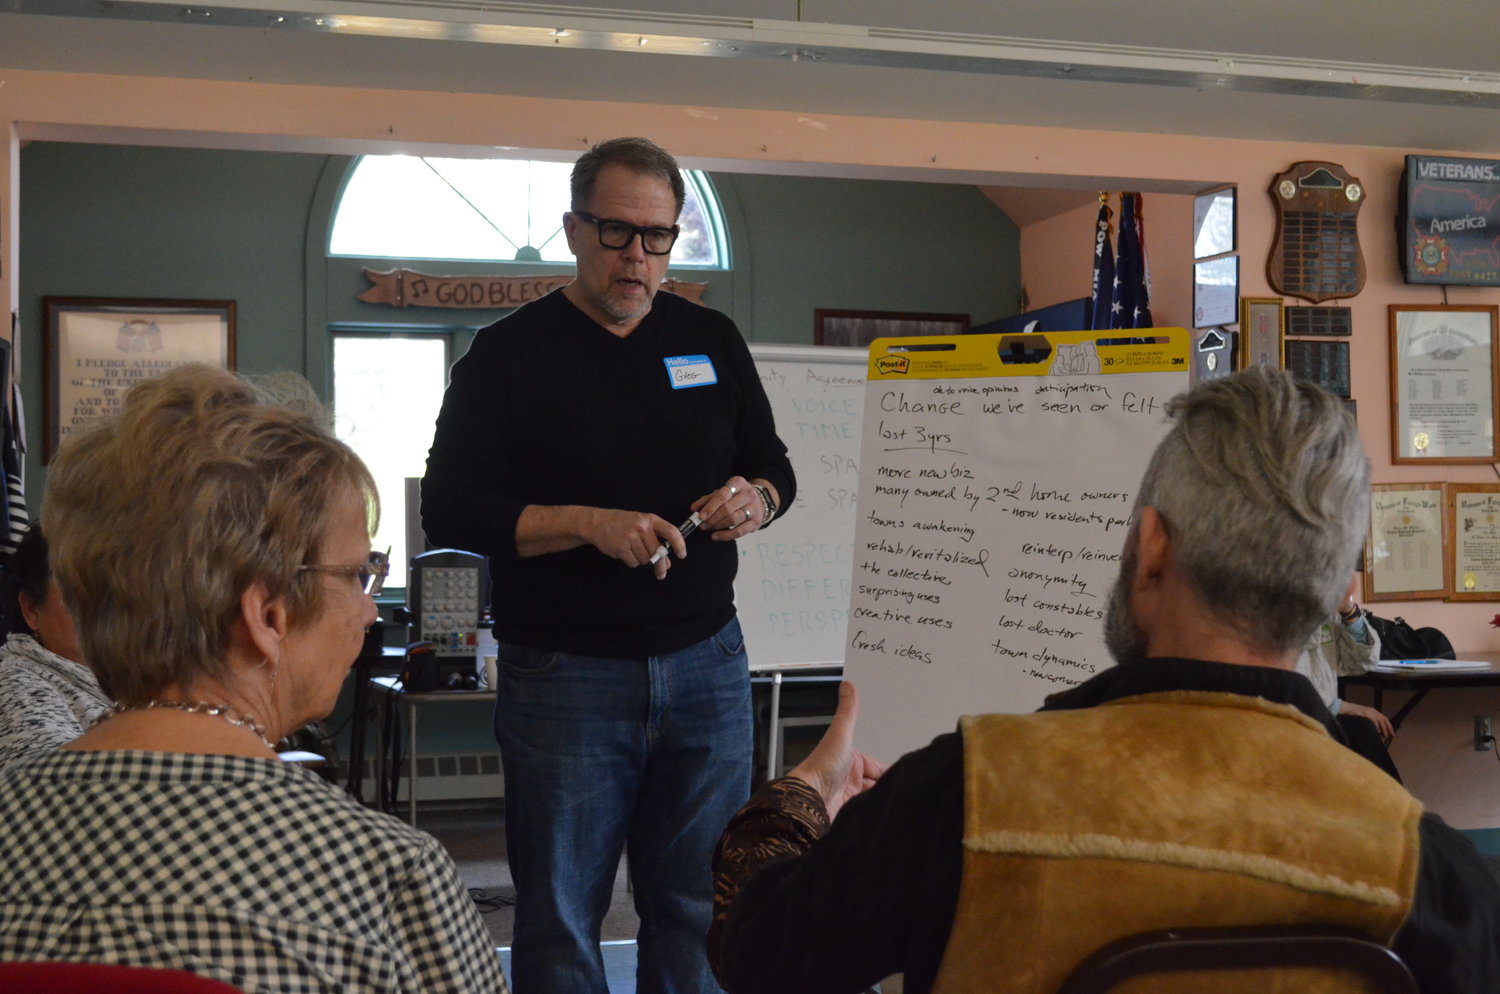 Facilitator Greg Triggs leads a small group through a discussion of change at the inaugural River Roundtable Project meeting, held at the Highland Senior Center.